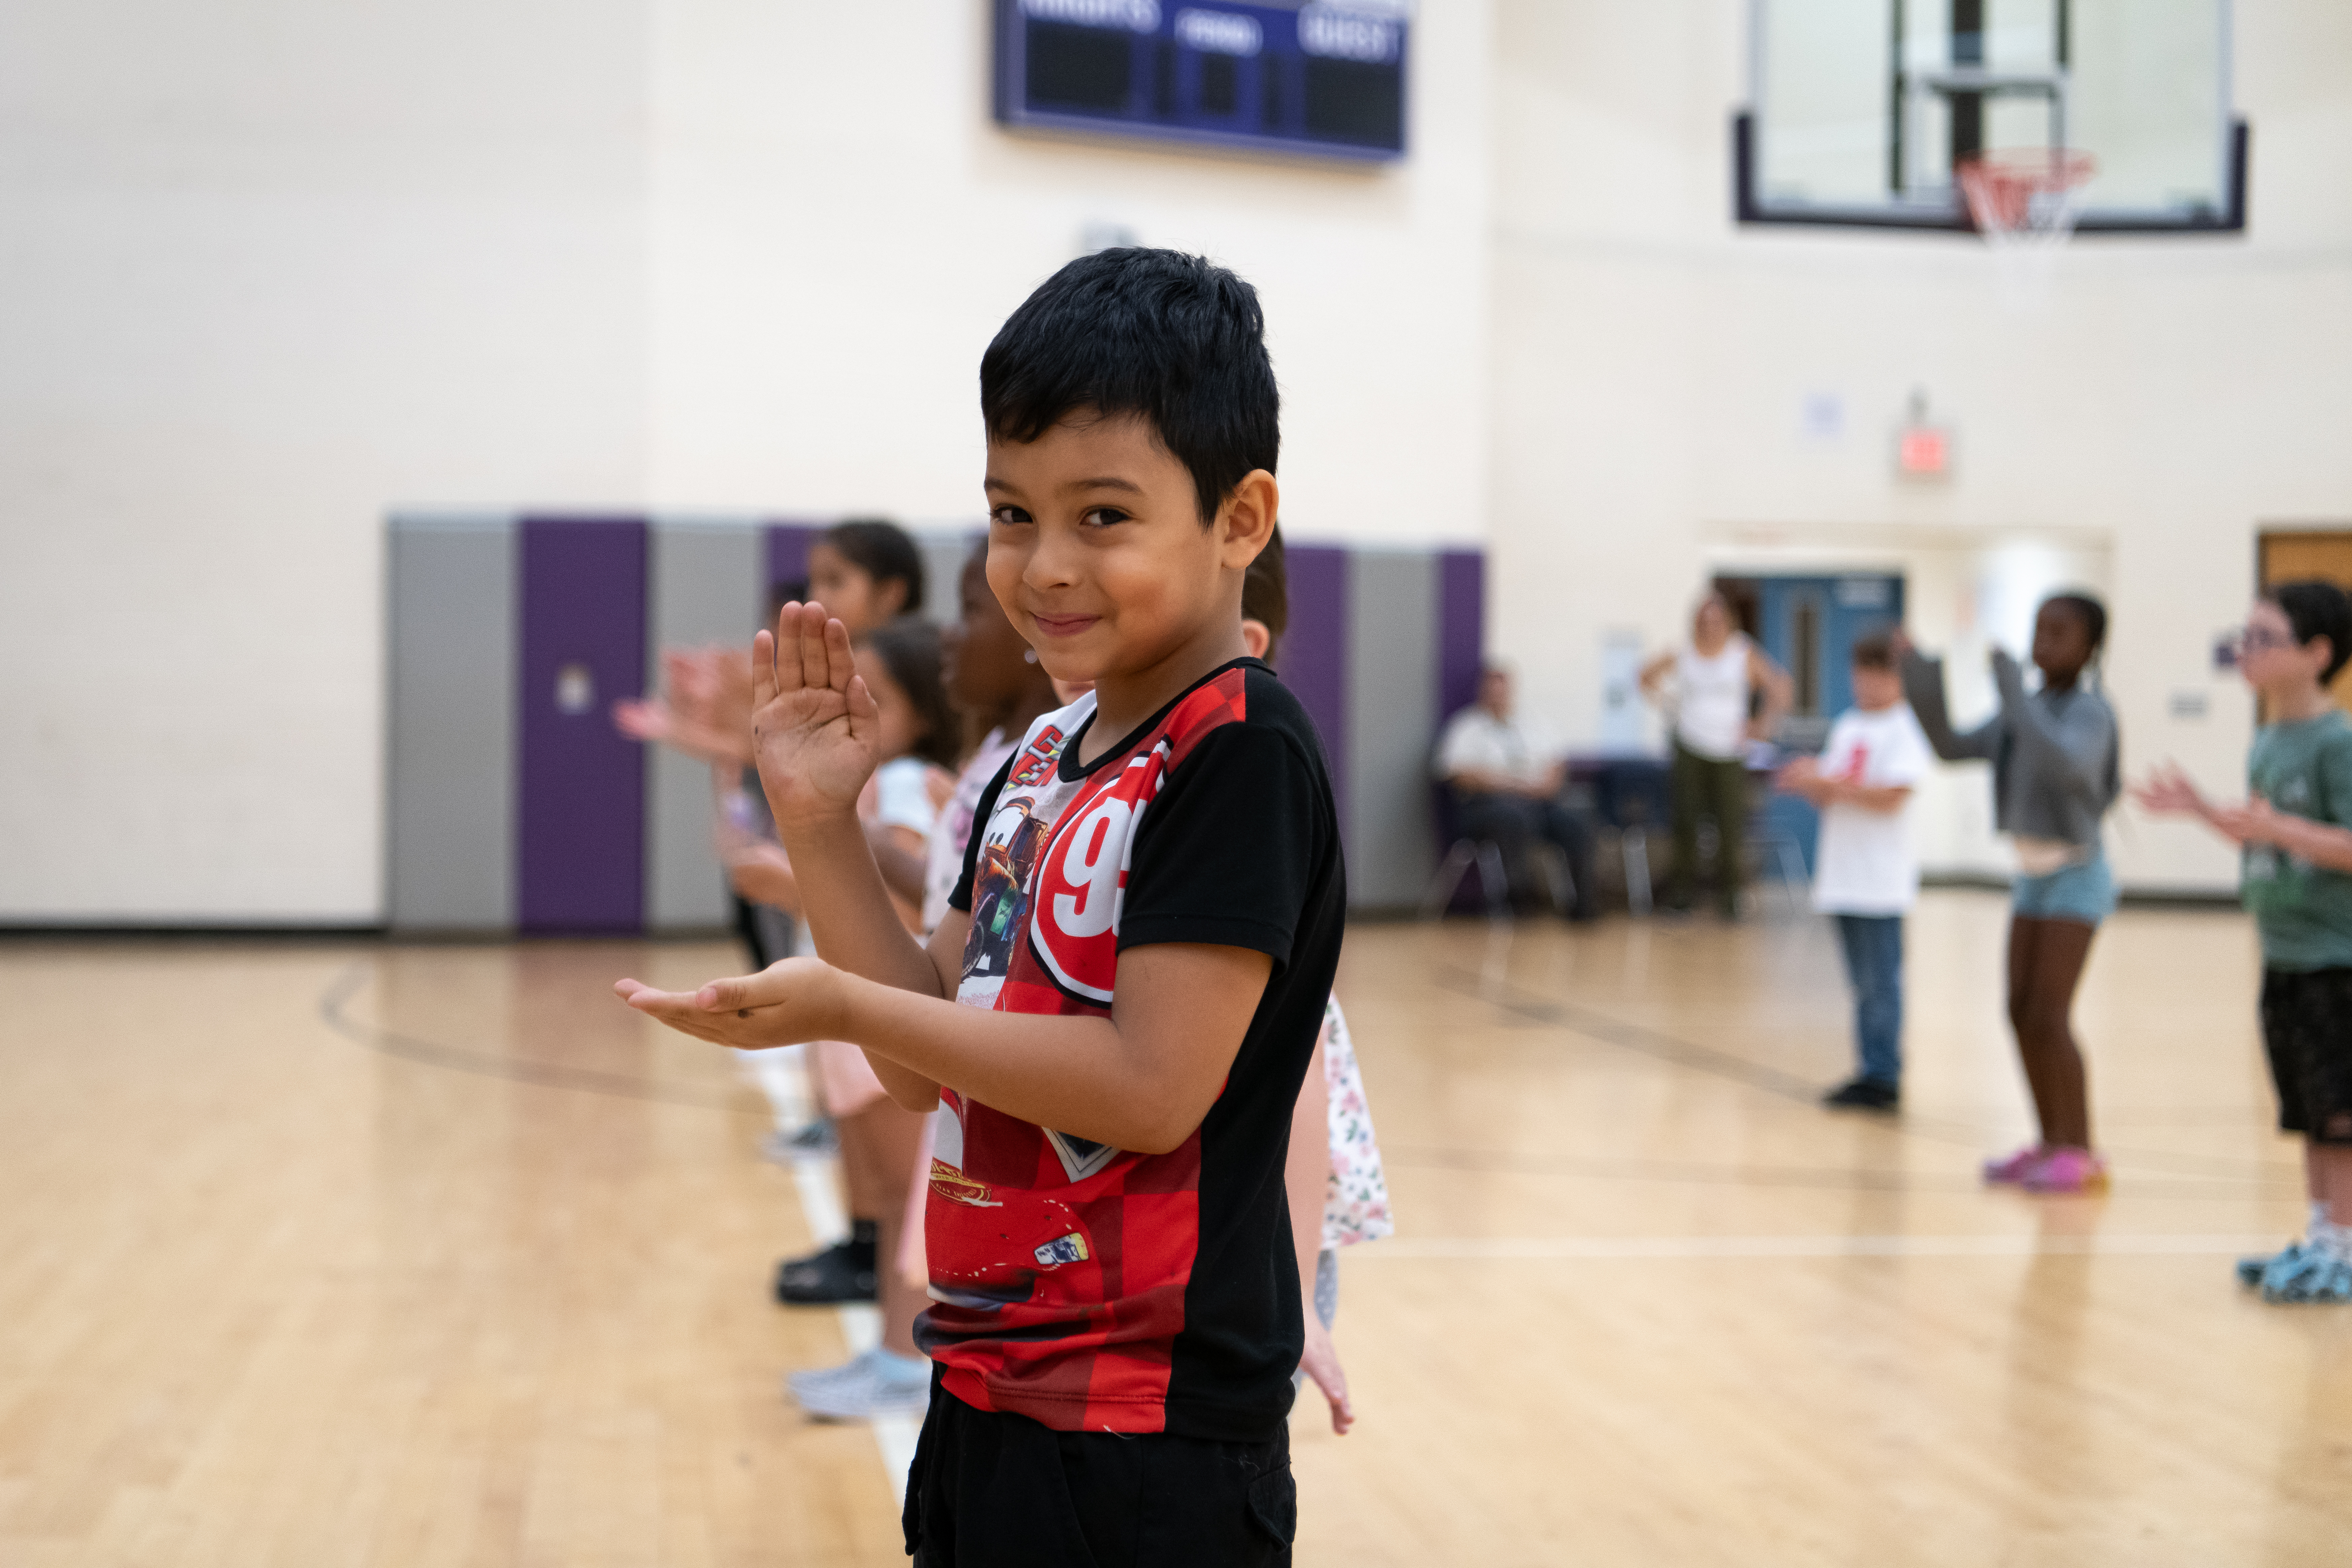 student clapping in dance class